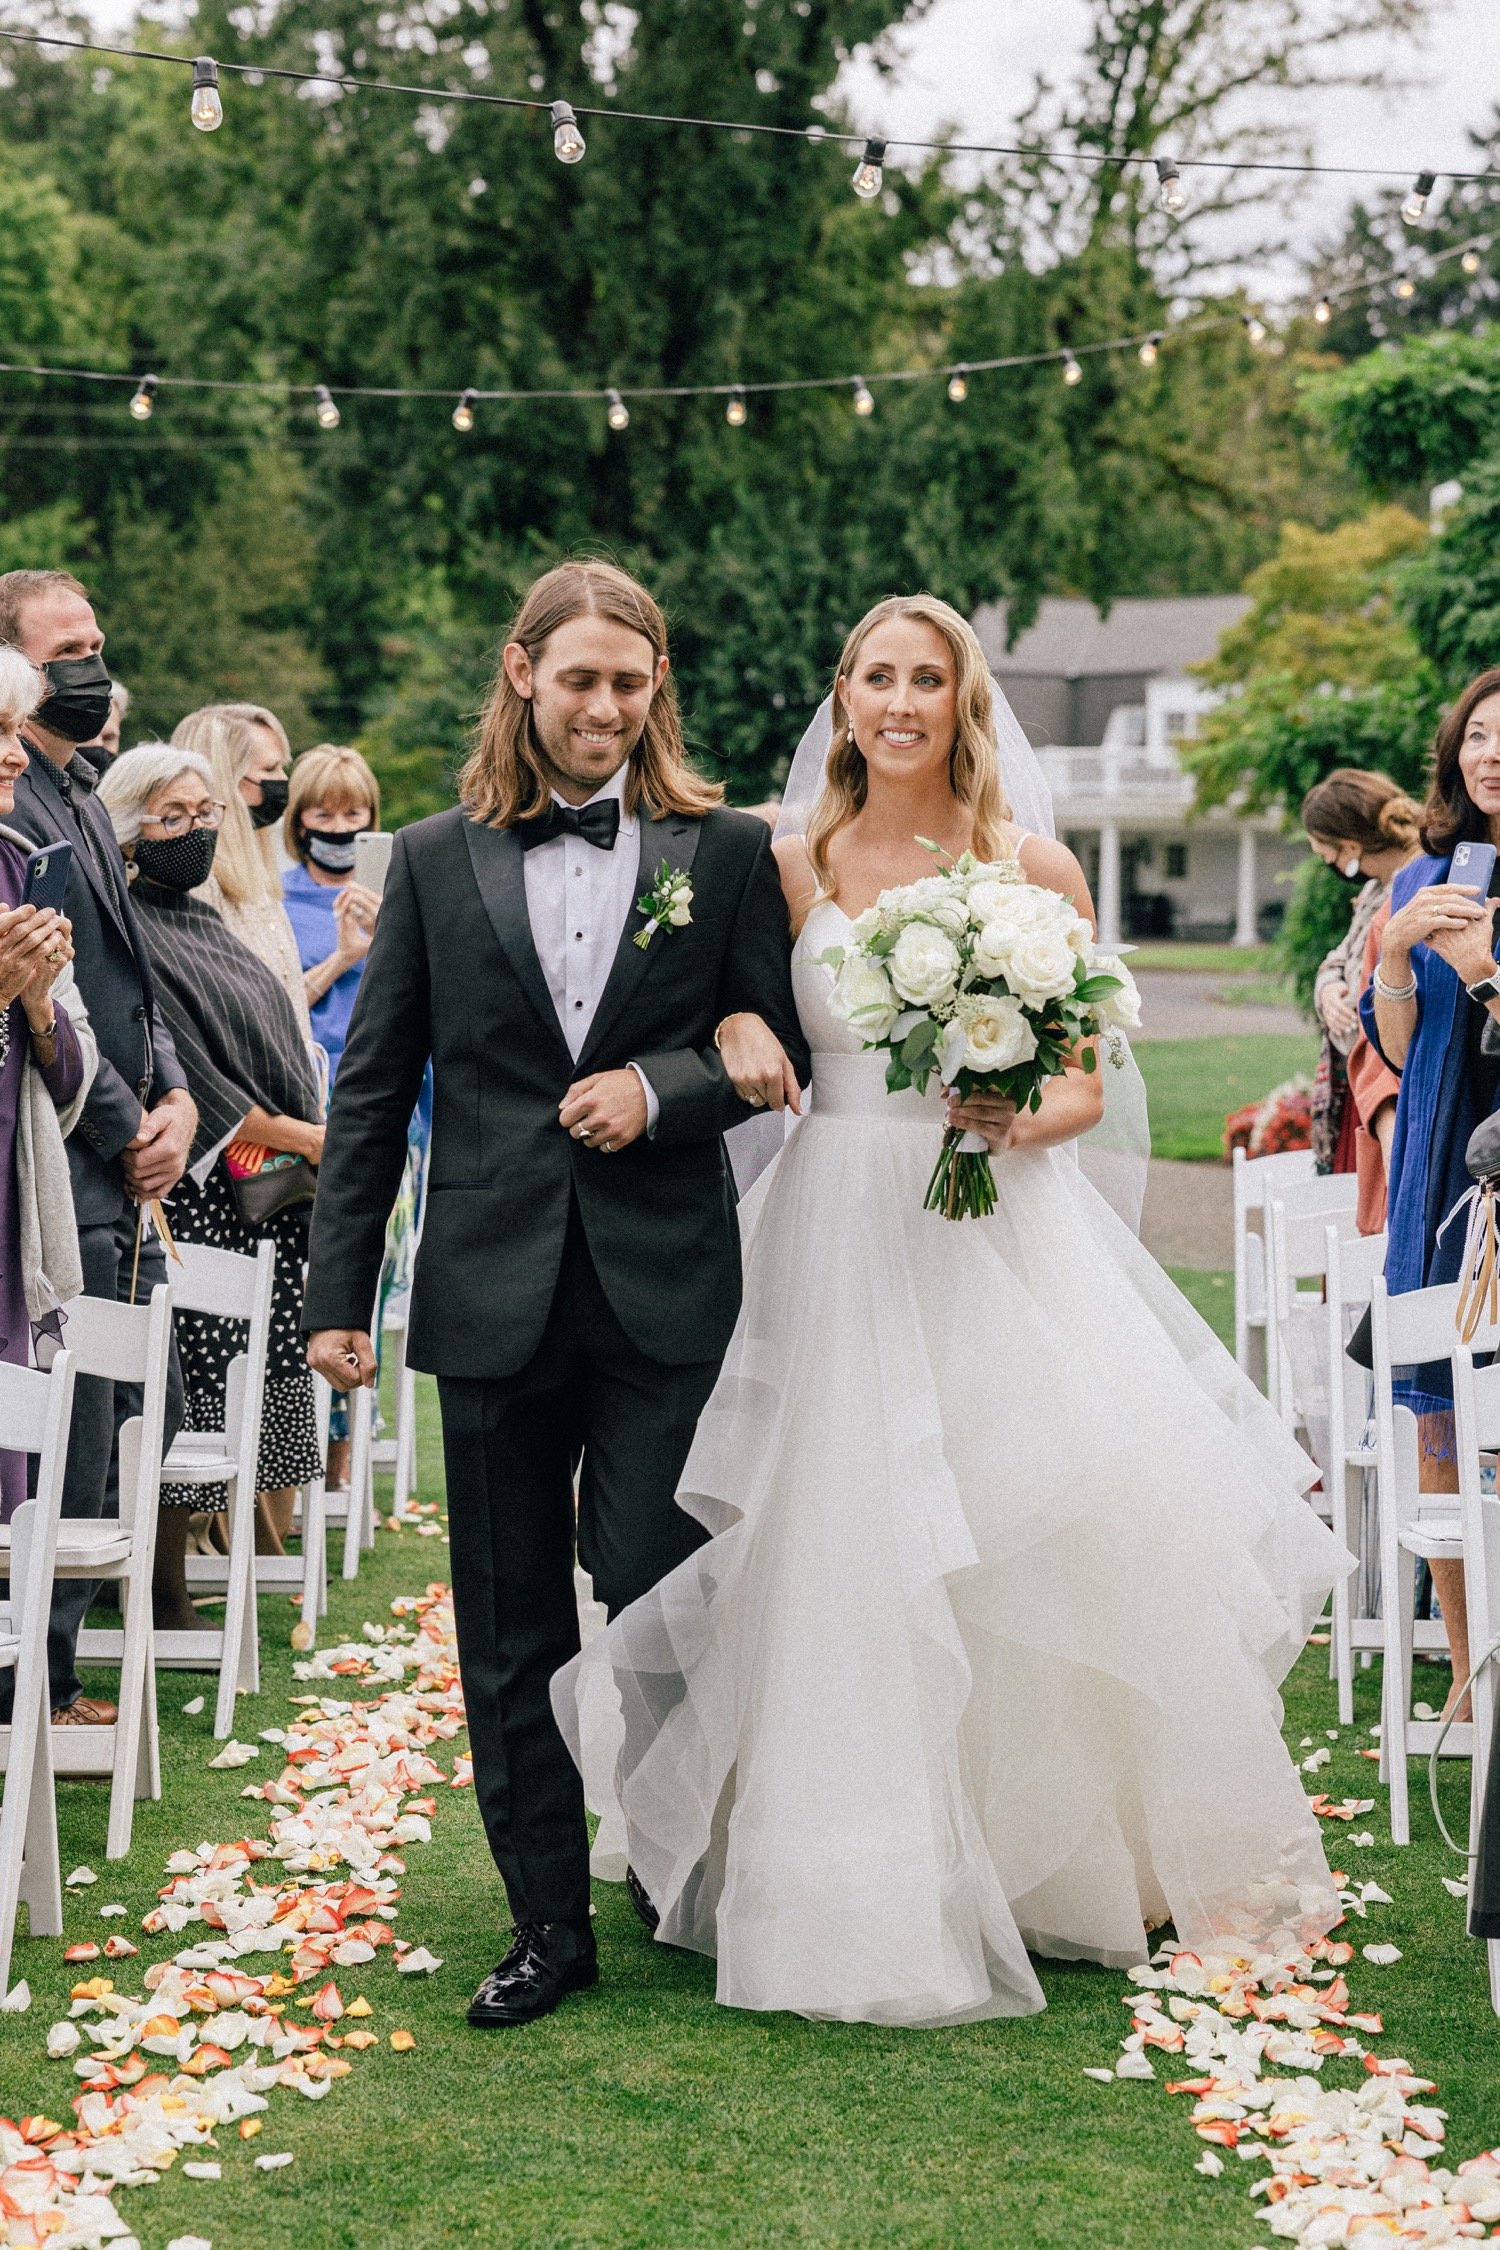  Bride walks down wedding aisle with man wearing black suit and bowtie 